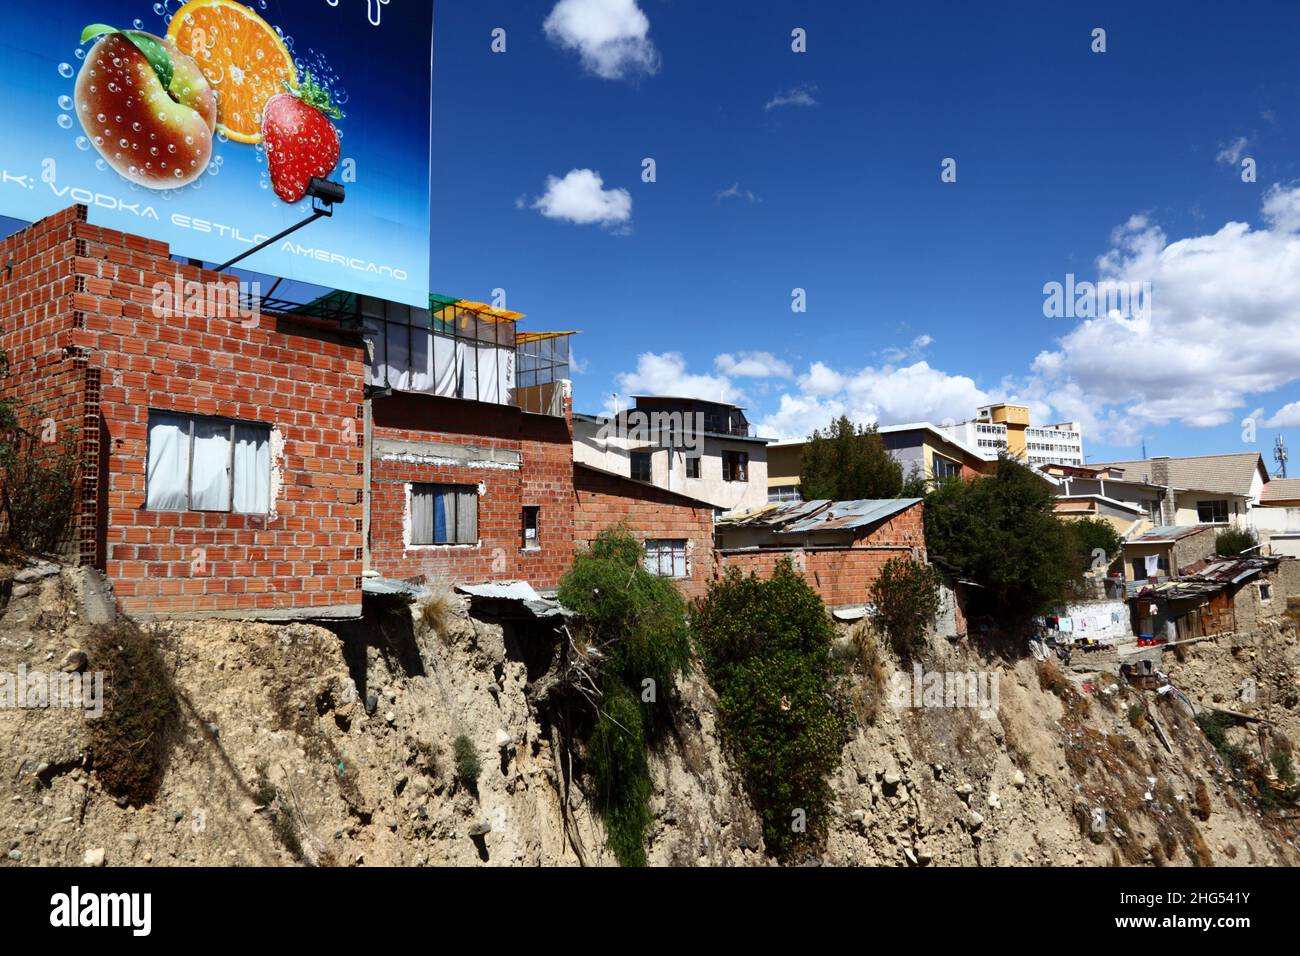 Brick houses on the edge of an unstable earth cliff / ravine in the central Miraflores district overlooking Avenida del Poeta, La Paz, Bolivia. Many of La Paz's hillside neighbourhoods have been built in unstable areas and without proper permits or building controls. Subsidence and landslides causing houses to collapse are common, especially in the rainy season. Stock Photo